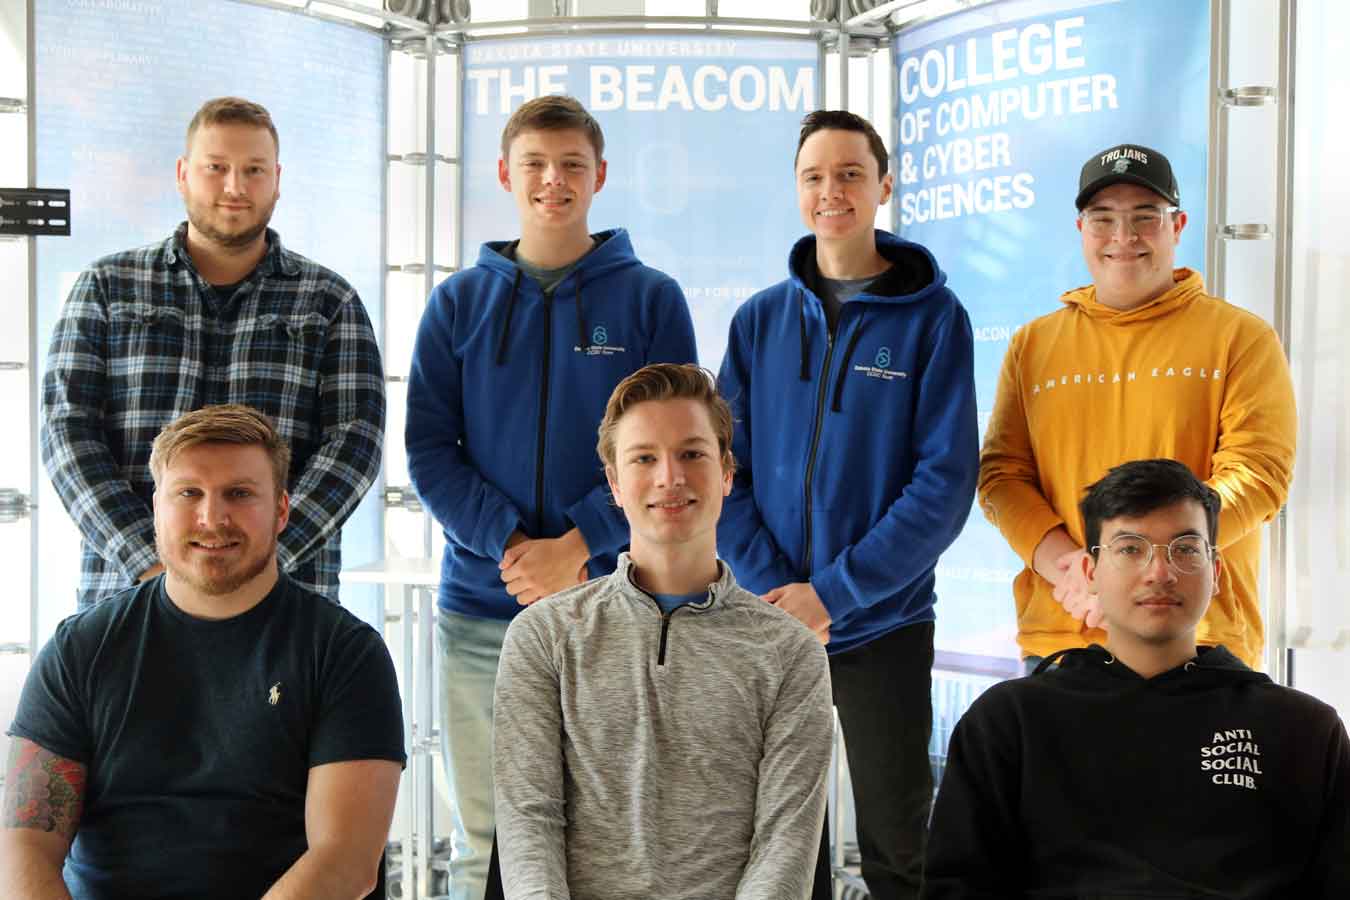 DSU’s CPTC team qualifies for the global championship in January. Team members include: Faculty Coach Tyler Flaagan (back left), Austen King, Shane Donahue, Nathan Ord; Cody Mayer (front left), Jacob Hince, and Chirawat “Kim” Yooyuenyong.